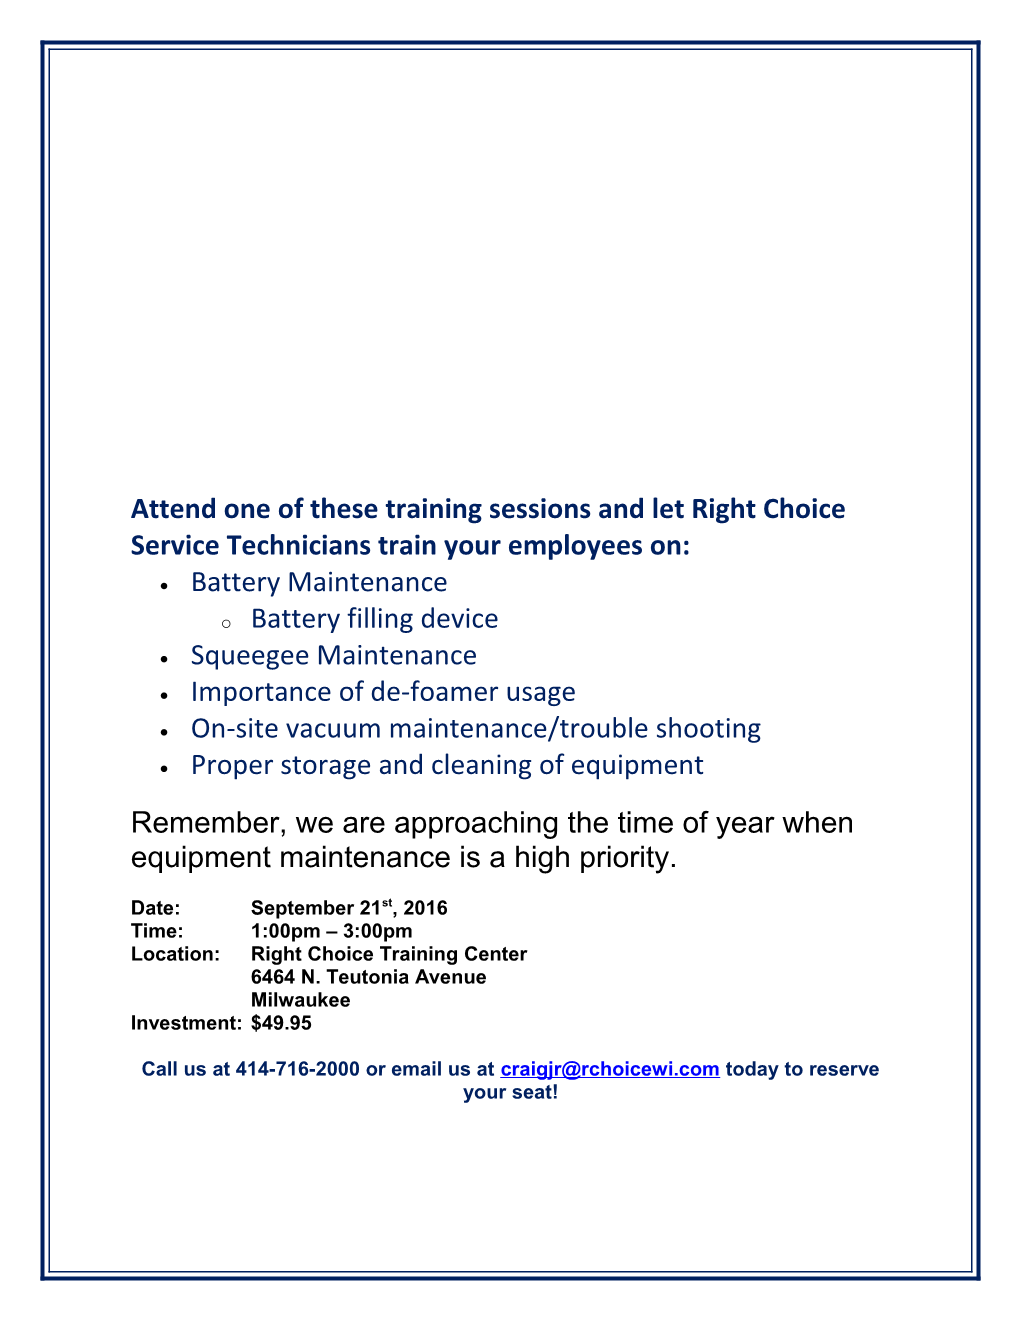 Attend One of These Training Sessions and Let Right Choice Service Technicians Train Your